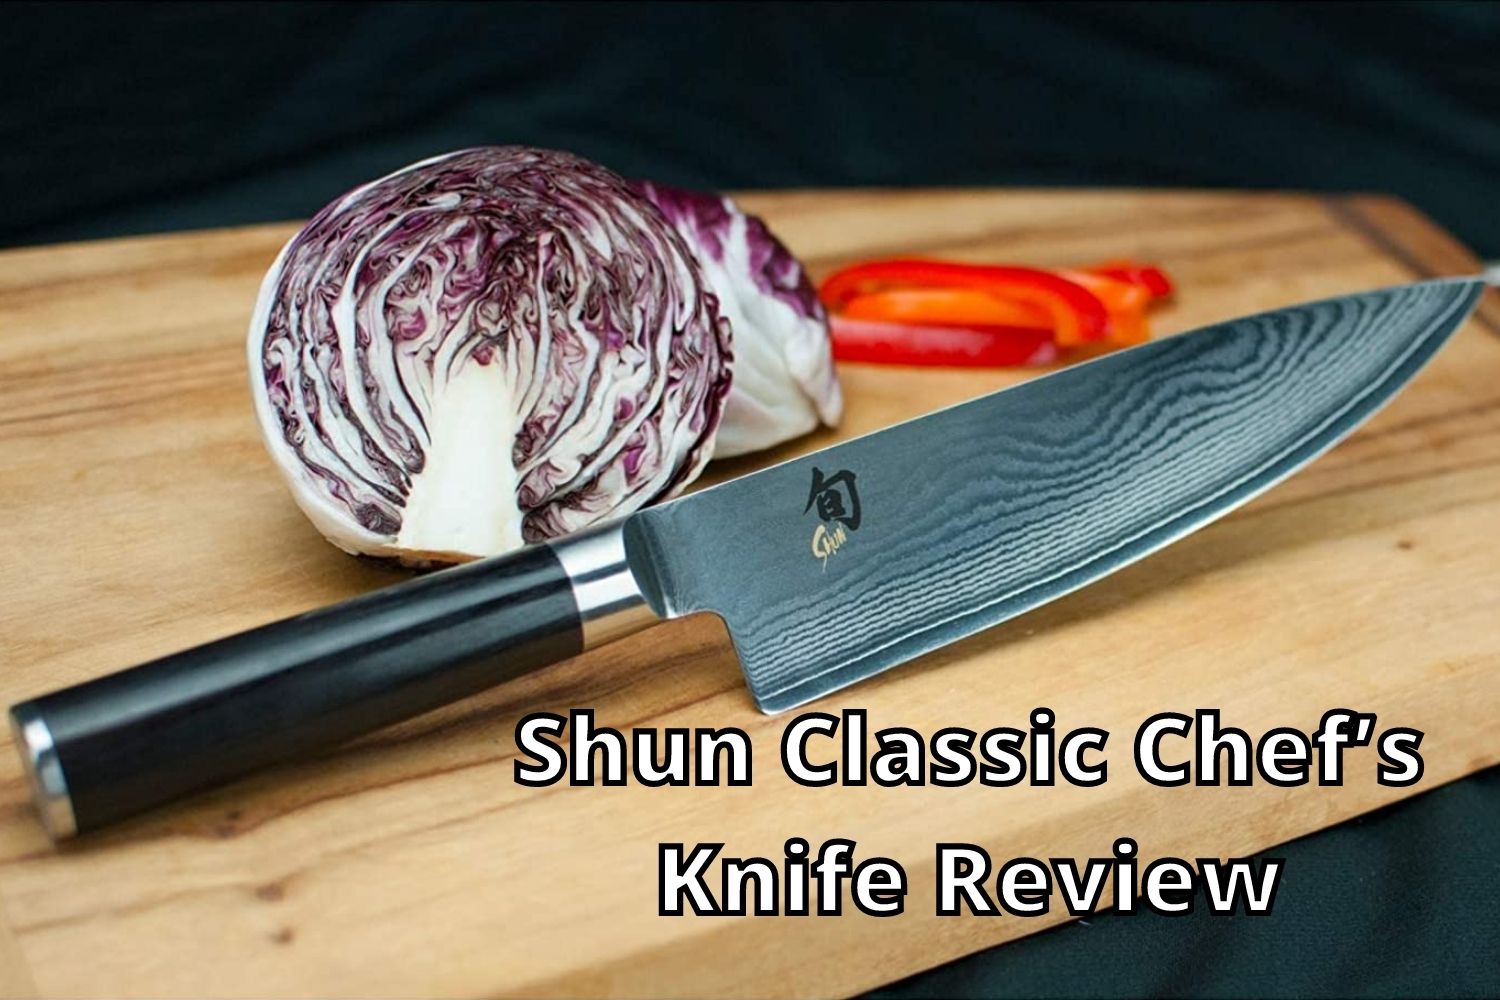 Shun Classic Chef’s Knife Review